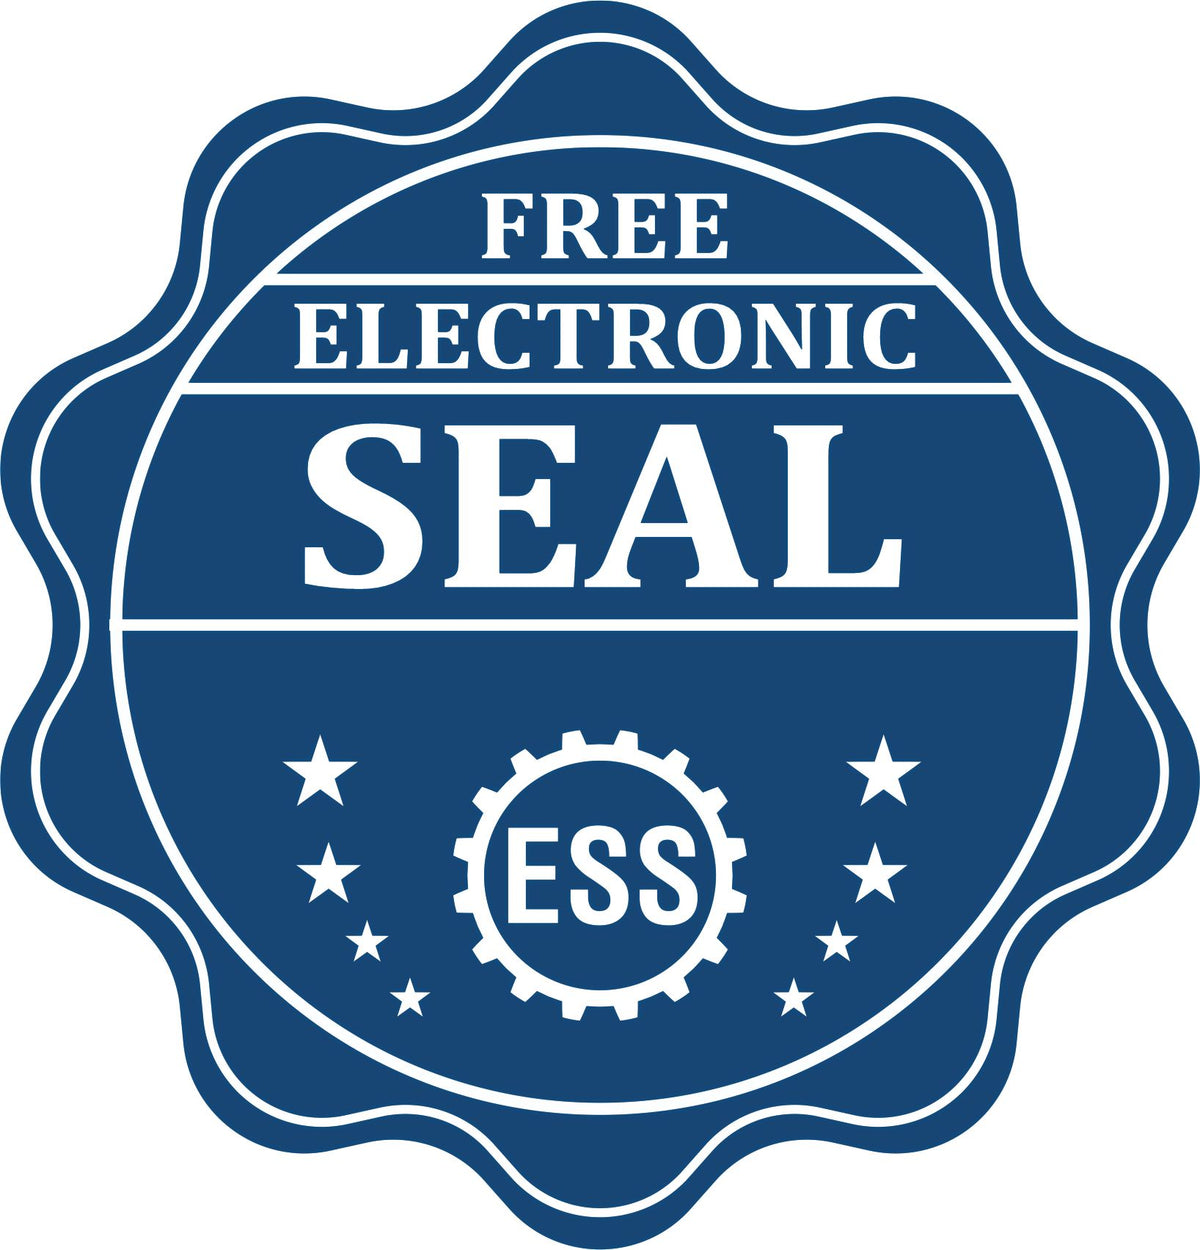 A badge showing a free electronic seal for the Slim Pre-Inked West Virginia Landscape Architect Seal Stamp with stars and the ESS gear on the emblem.